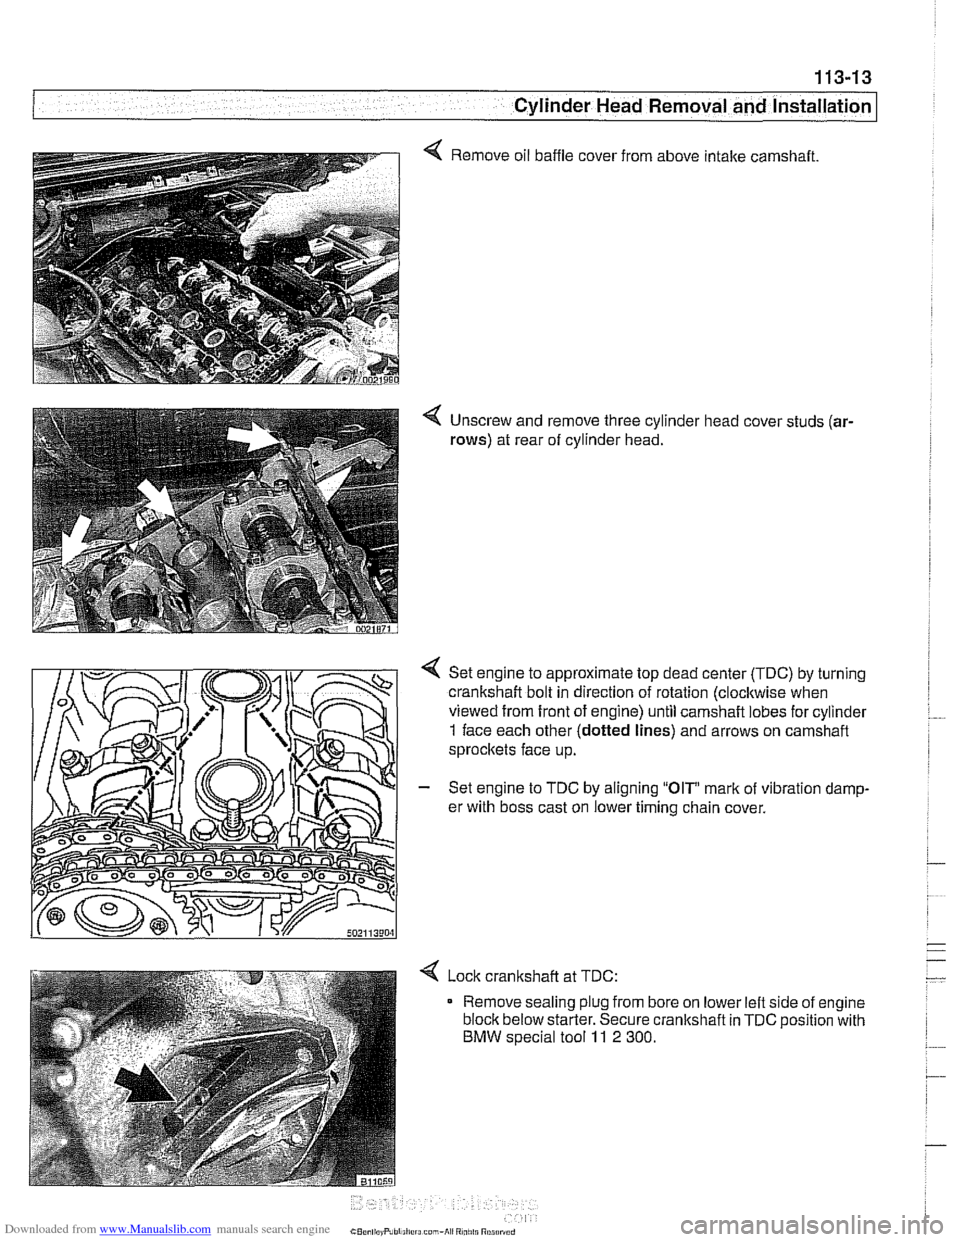 BMW 540i 2001 E39 Workshop Manual Downloaded from www.Manualslib.com manuals search engine 
- - , -. I Cylinder Head Removal and lnstallatio~ 
4 Remove oil baffle  cover from  above intake camshaft. 
4 Unscrew  and remove  three cylin